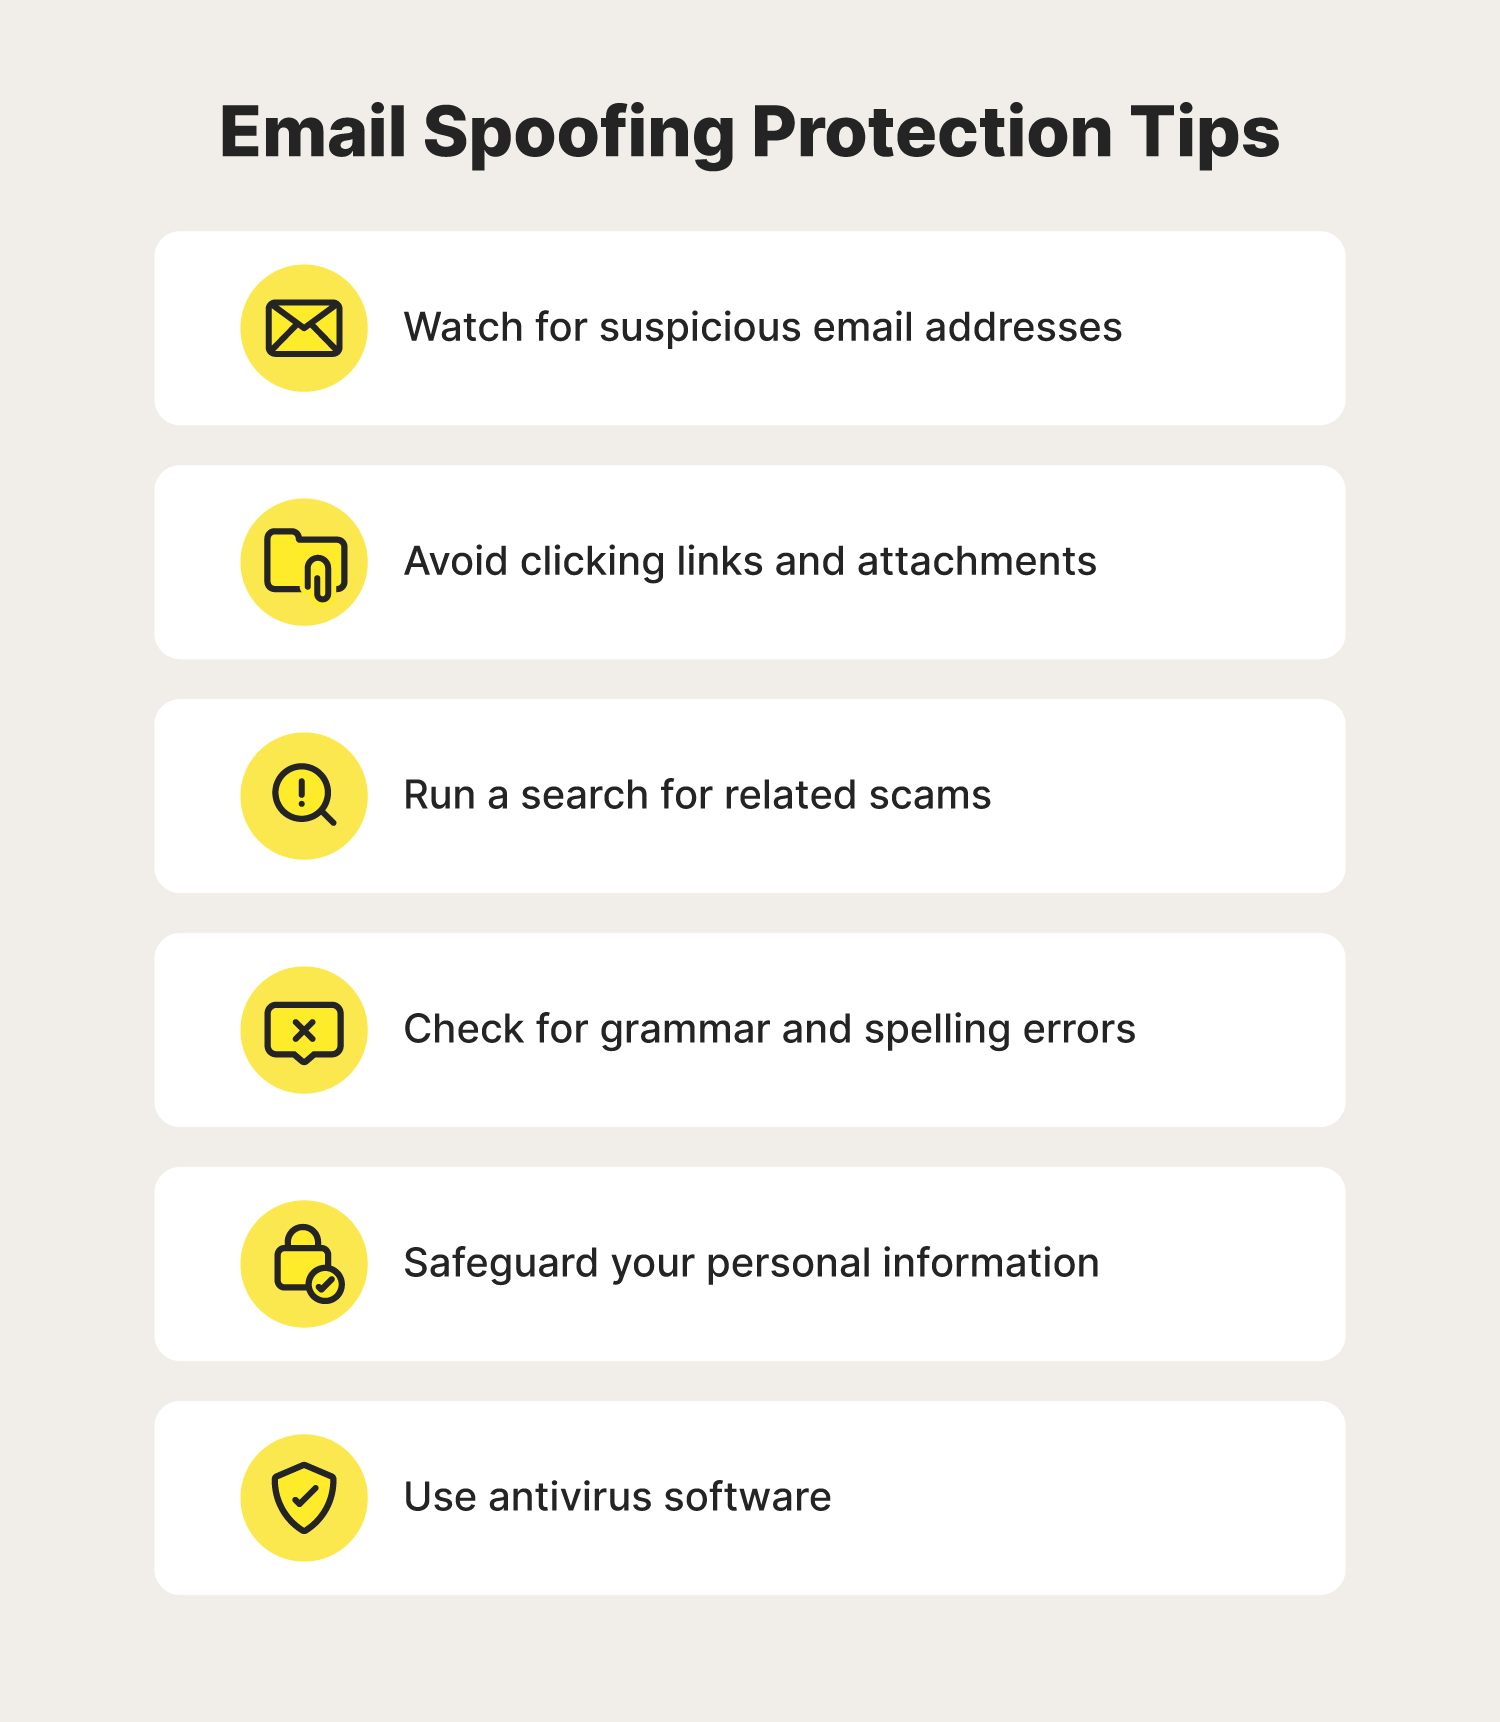 A graphic lists six cybersecurity tips to help protect against email spoofing.